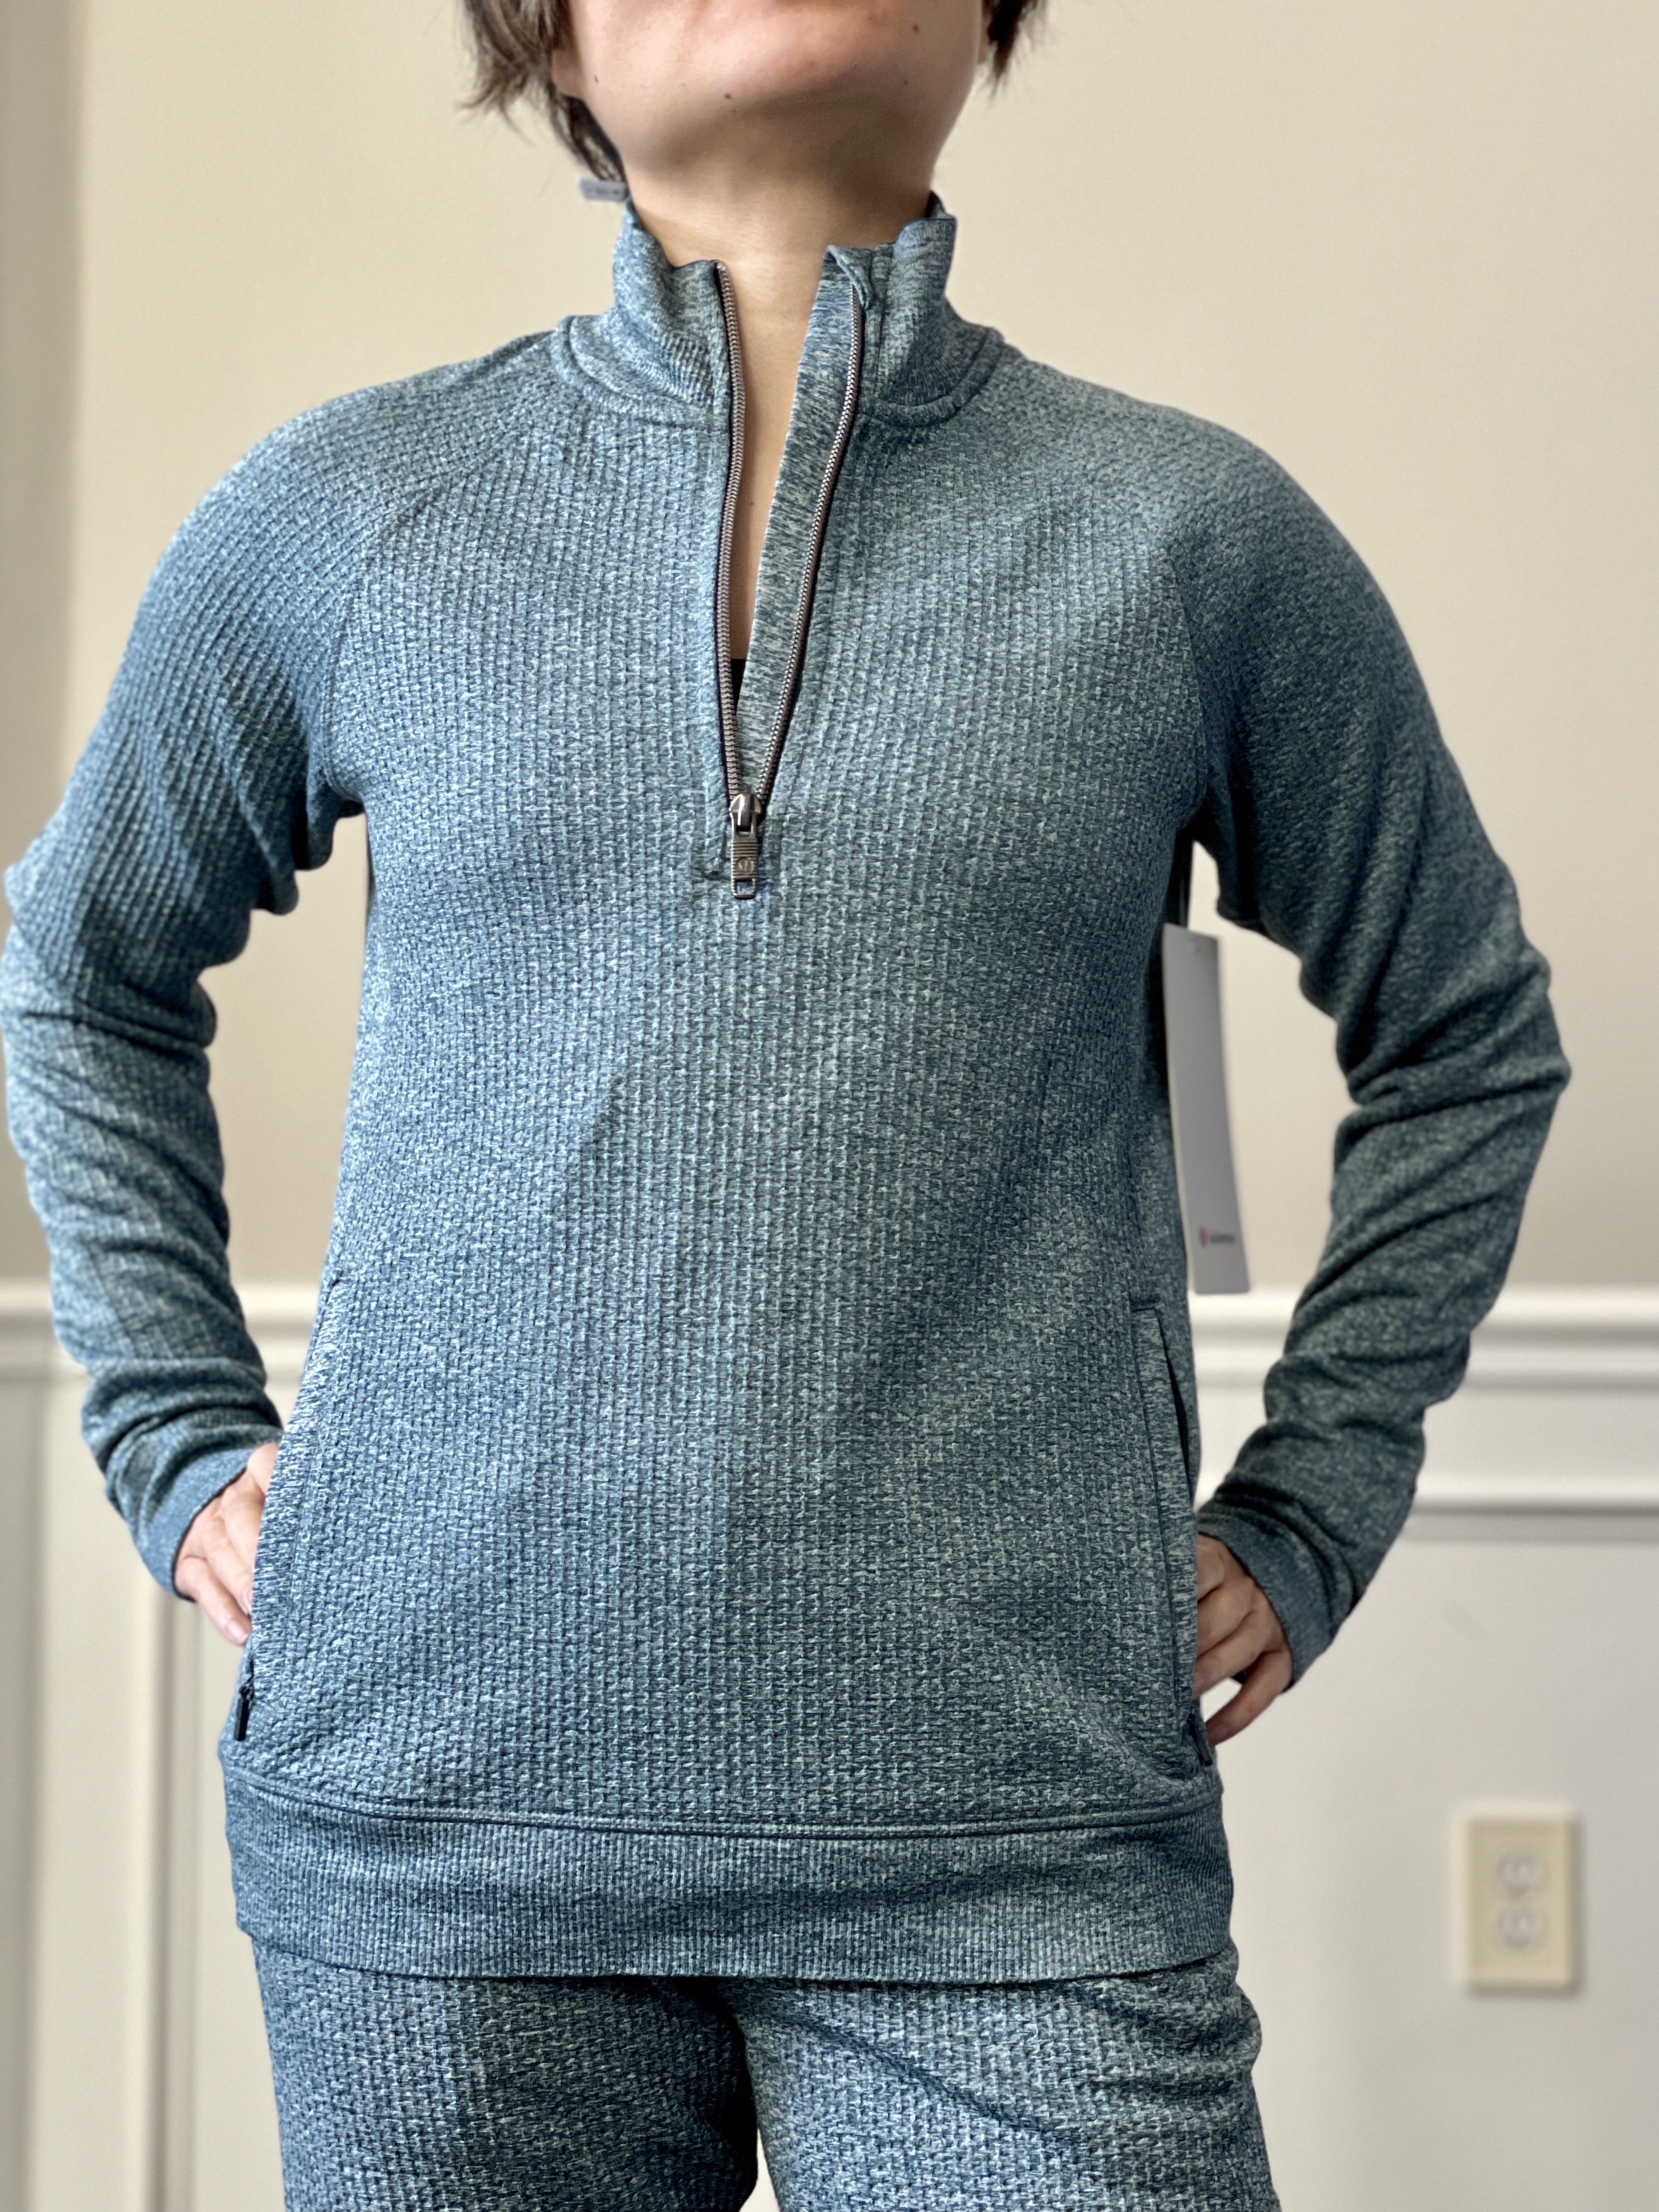 Fit Review! Engineered Warmth Jogger and Engineered Warmth 1/2 Zip